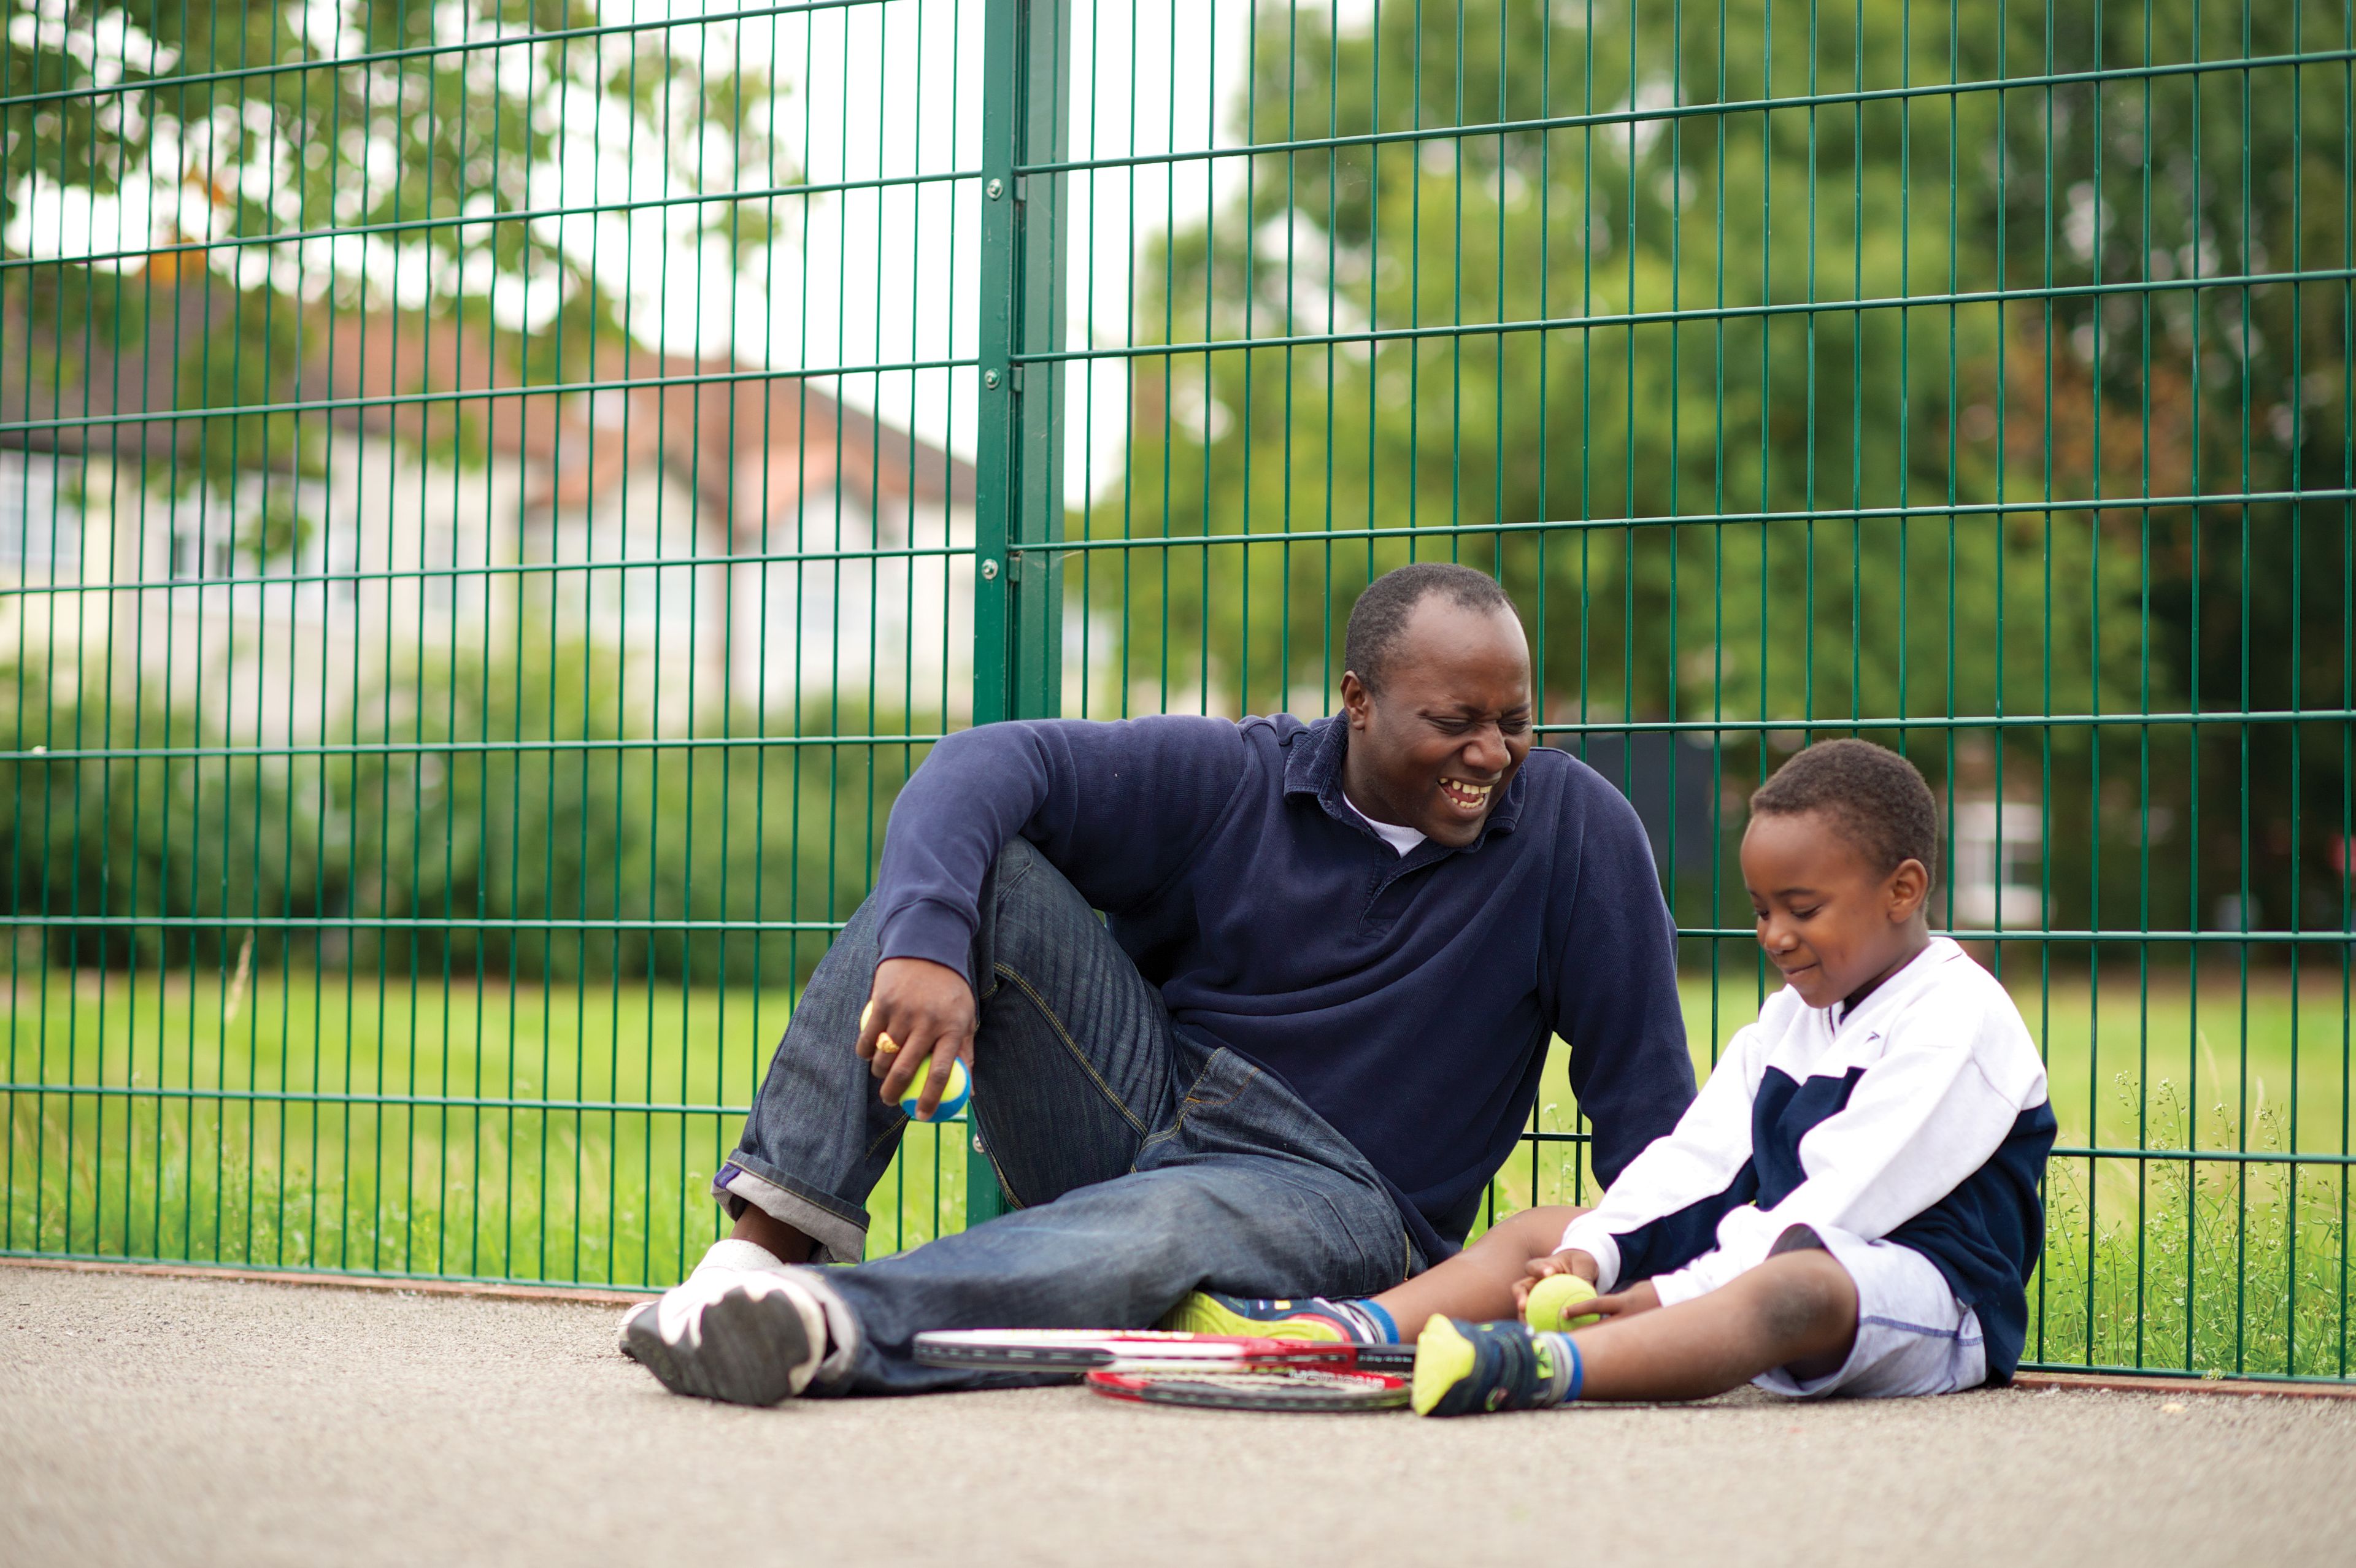 A father and son sitting on the ground in a tennis court.